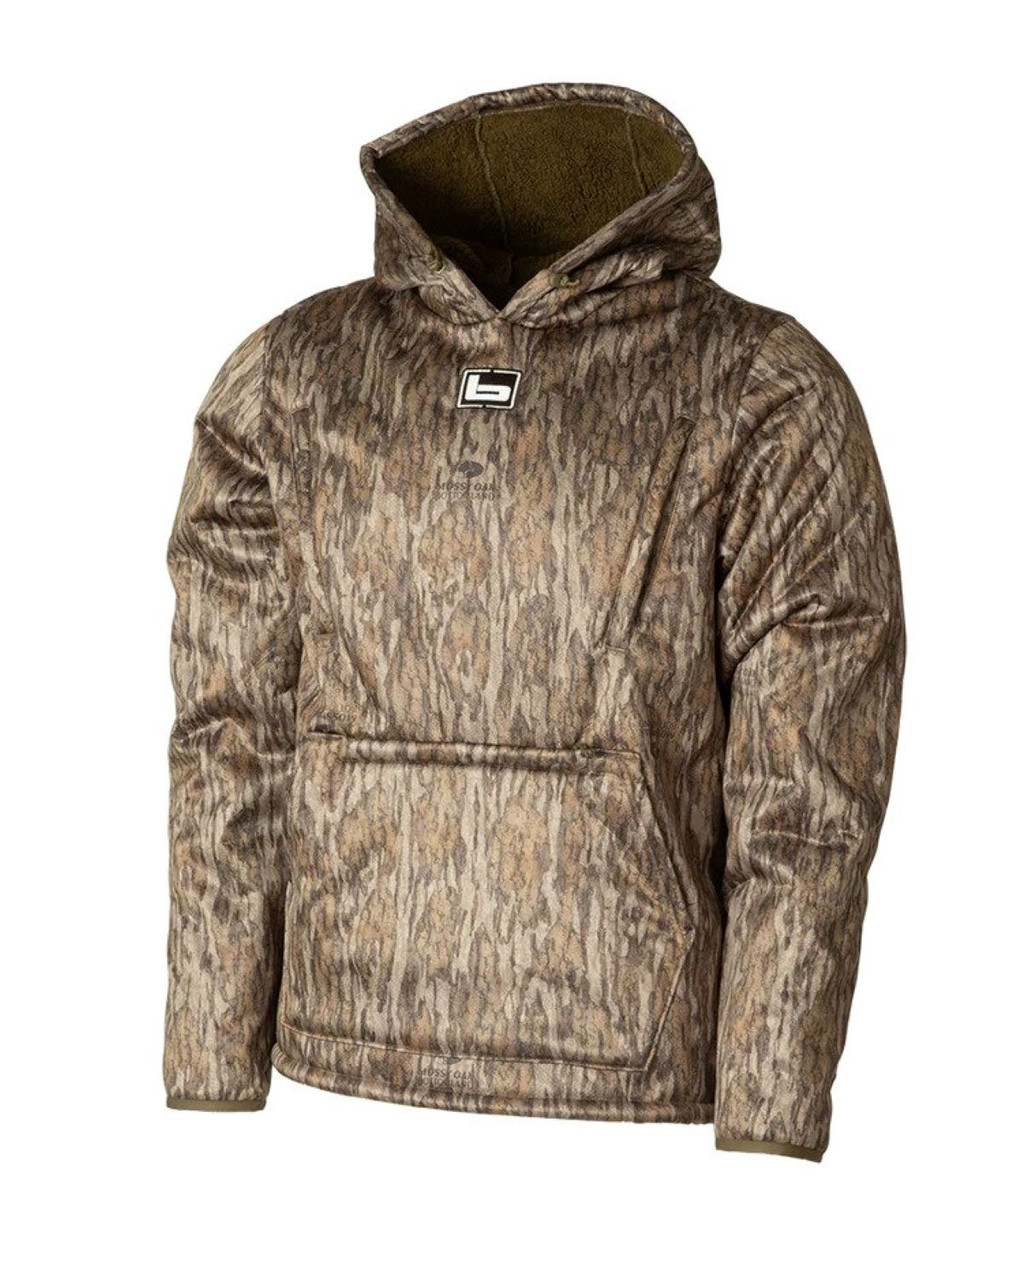 Banded Fanatech Softshell Hoodie Coral-Fleeced Lined - Bottomland - 2XL